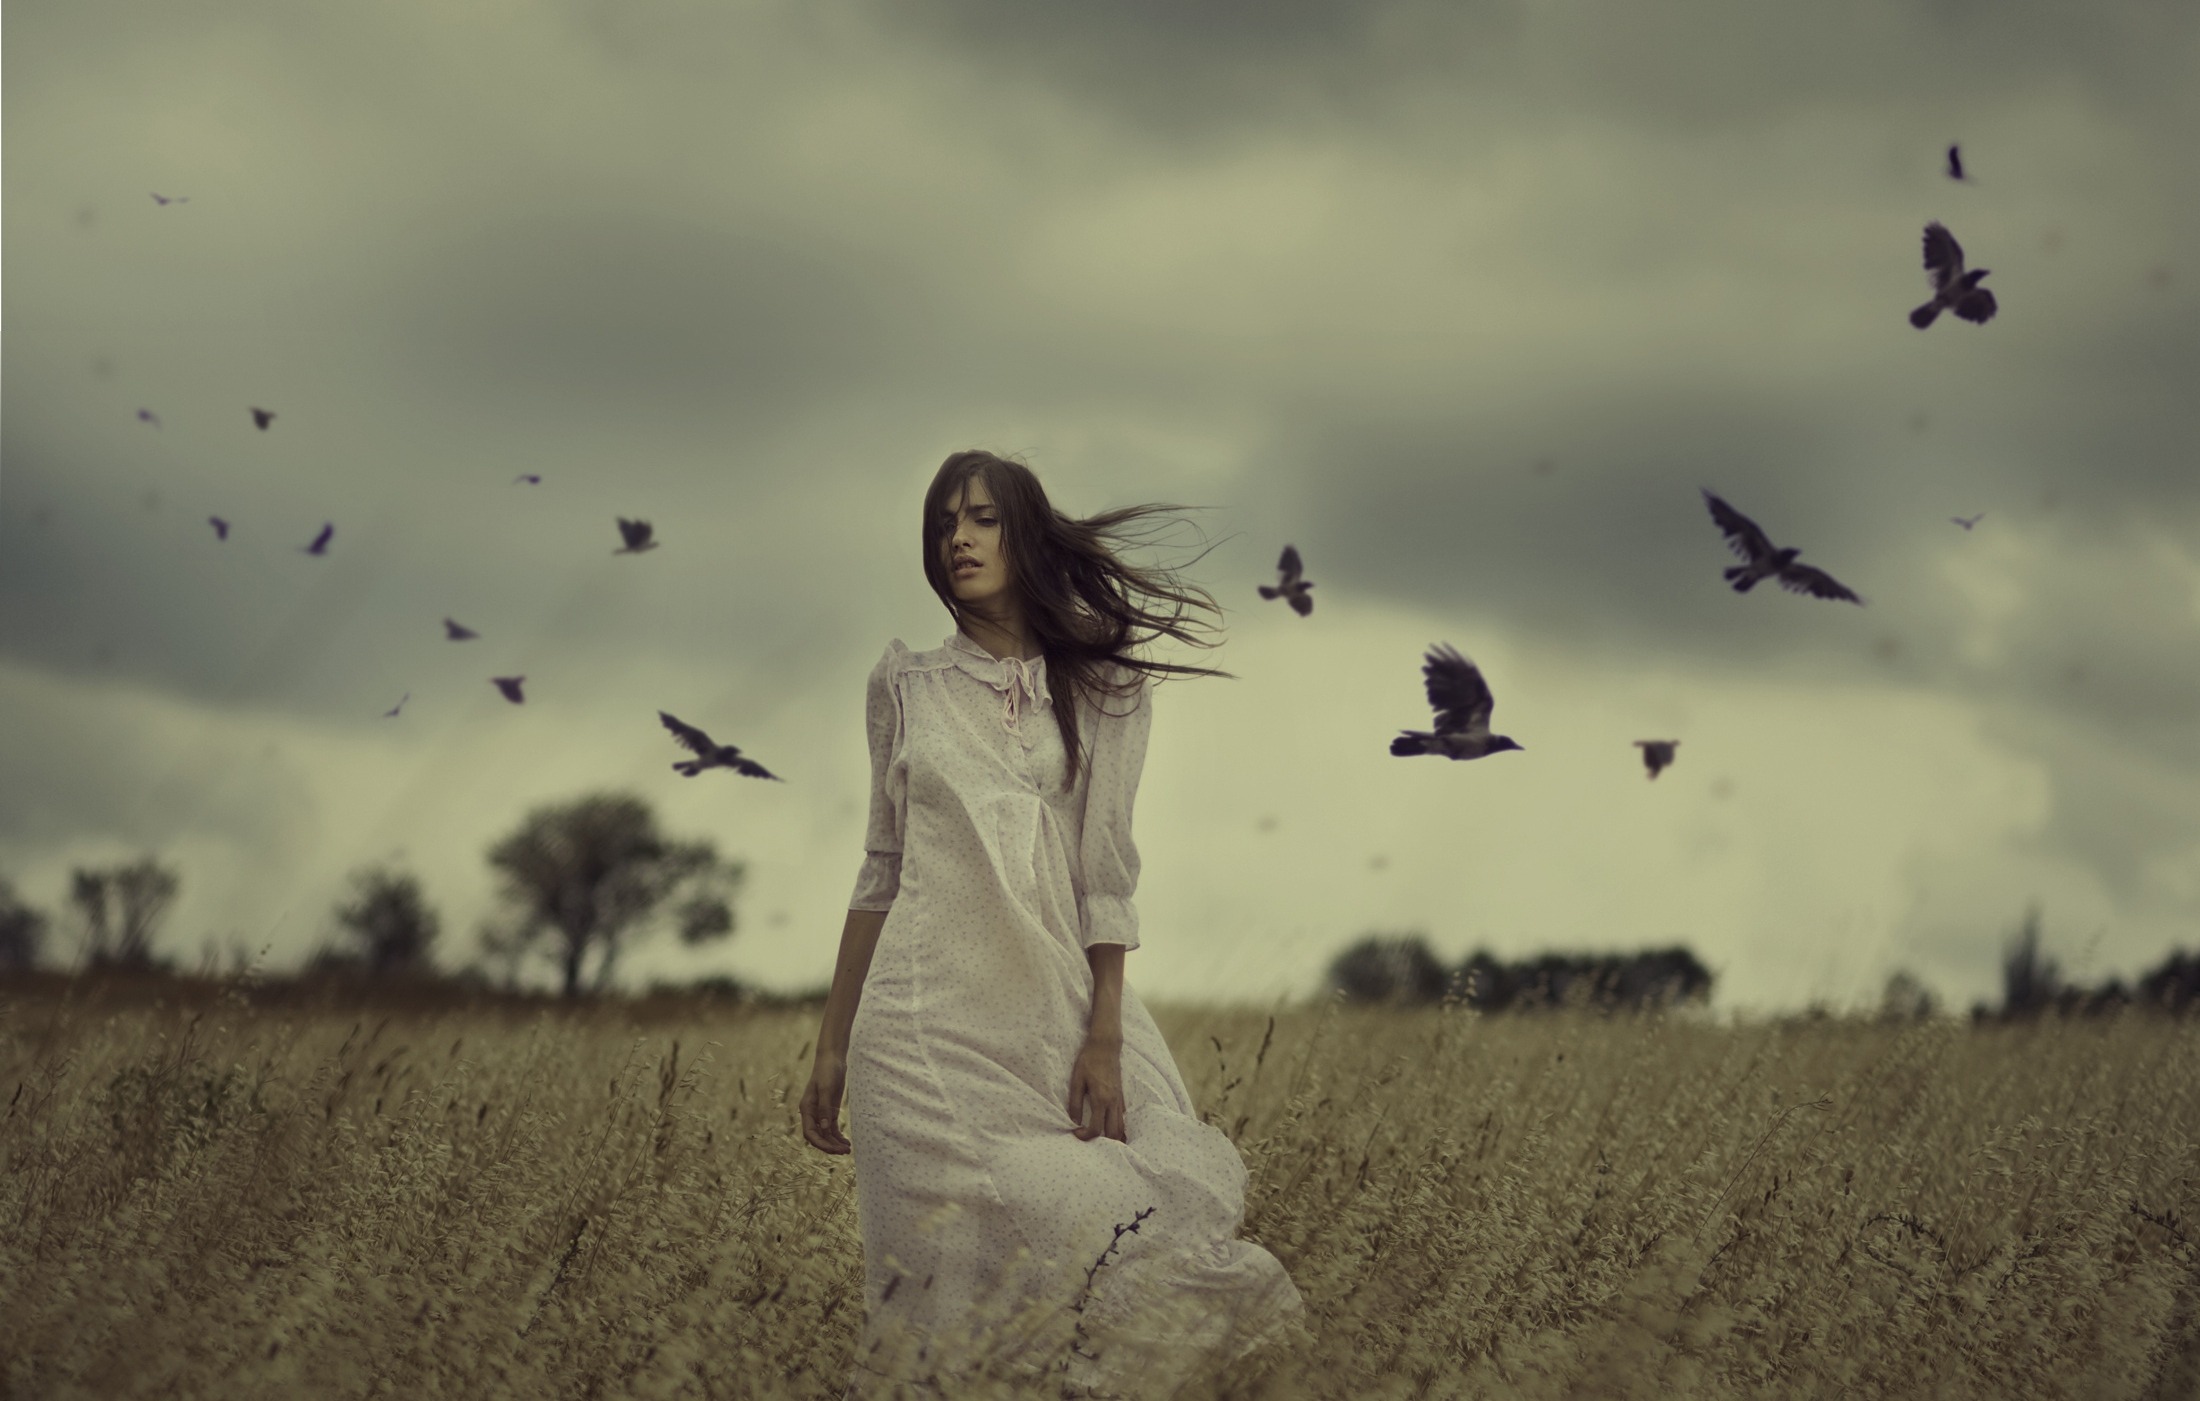 Gloomy but attractive woman in white gown standing in a flower field with black birds hovering around her.